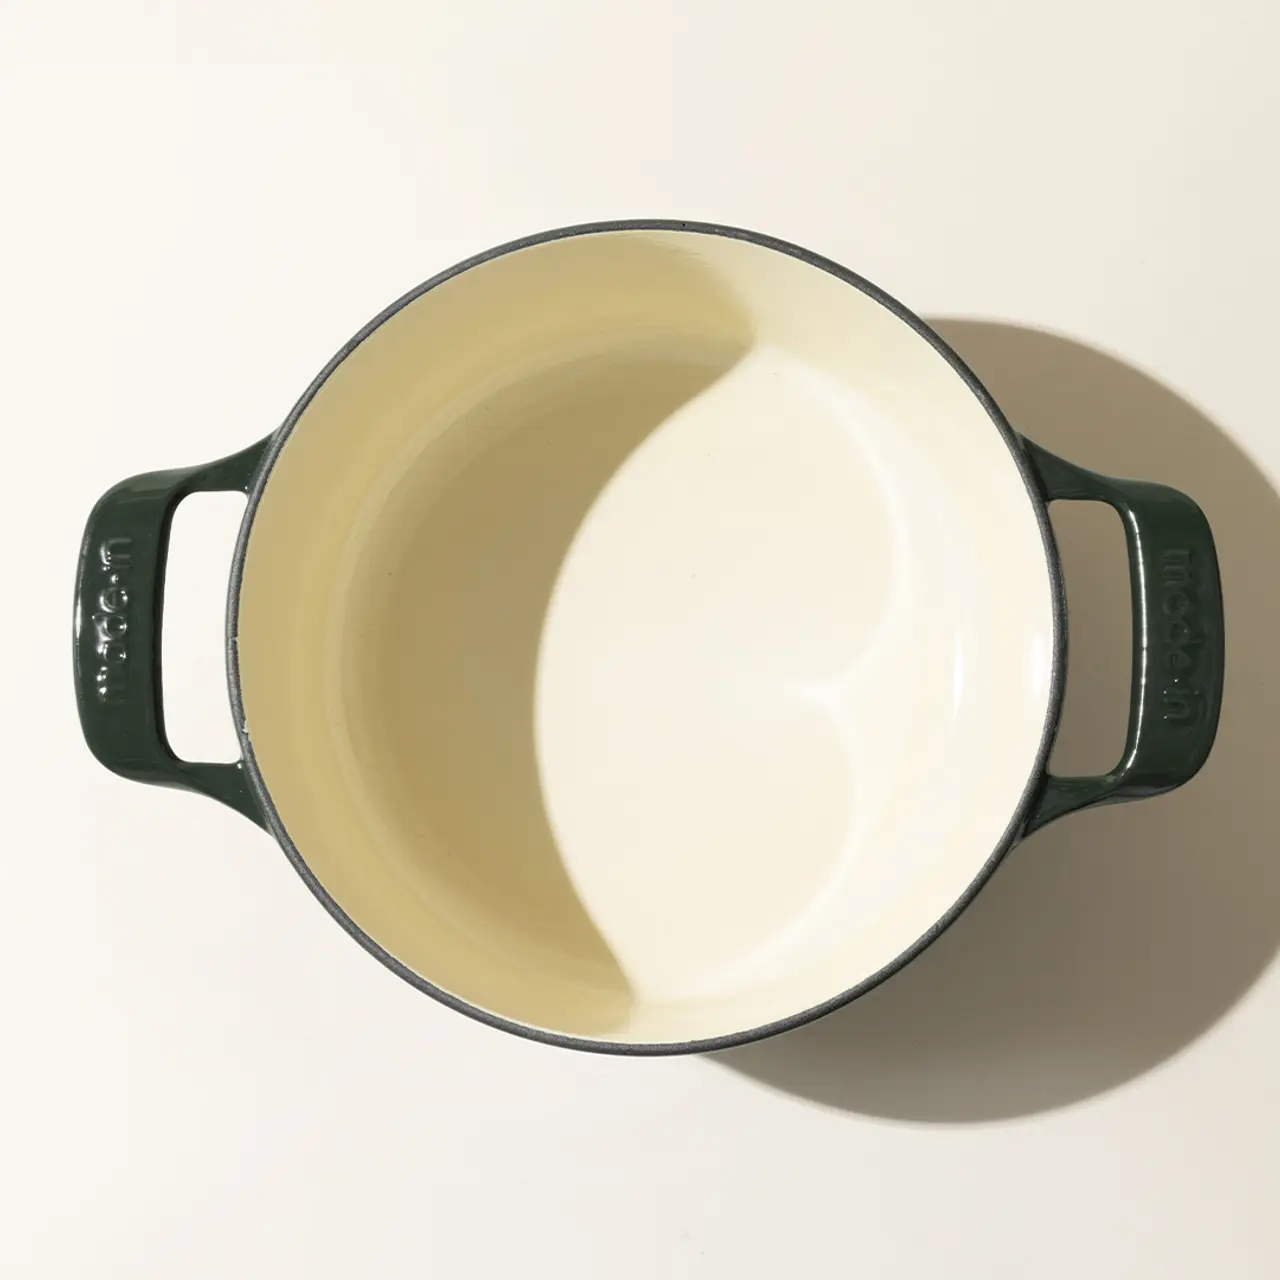 An empty, cream-colored enamel pot with two dark green handles viewed from directly above, casting a soft shadow on a light surface.